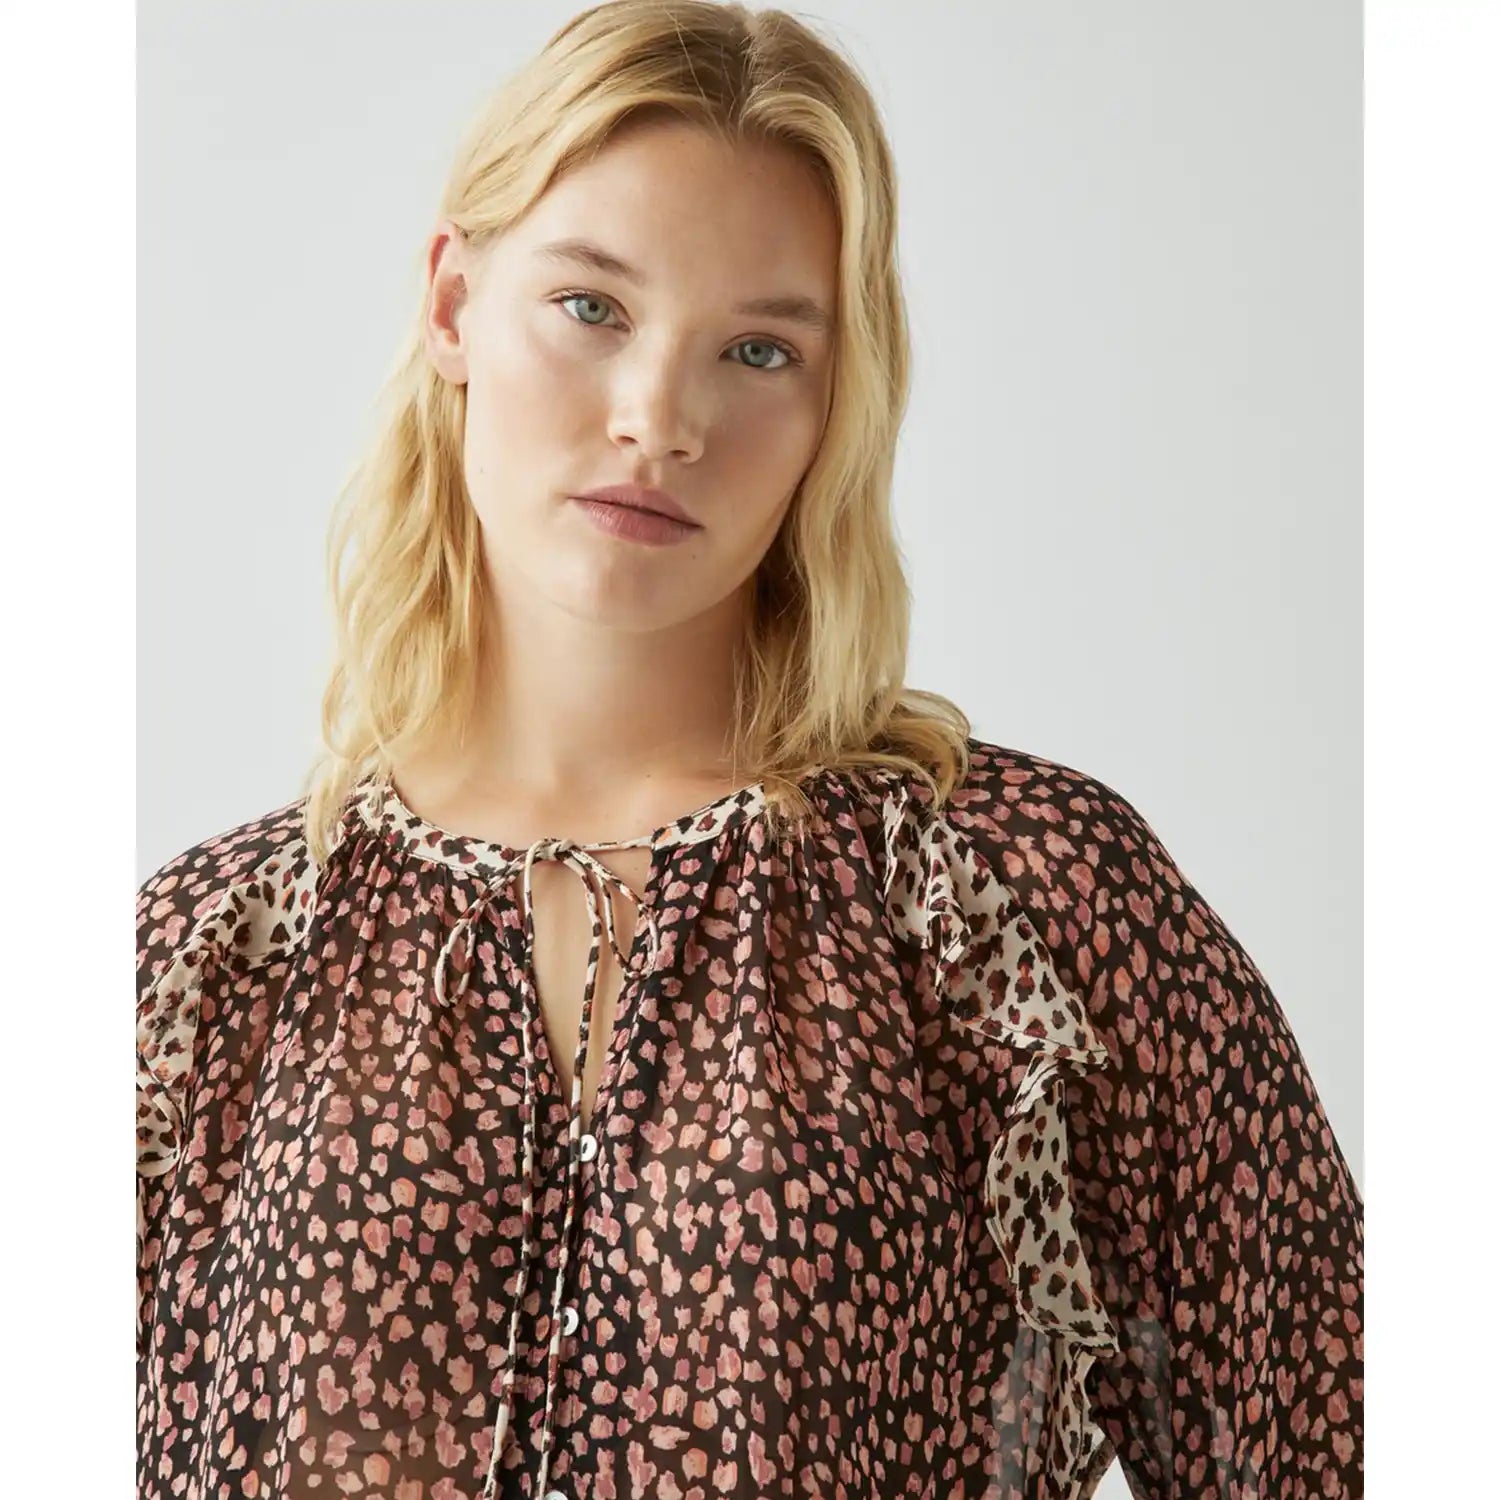 Couchel Ruffled Print Blouse - Multi 2 Shaws Department Stores